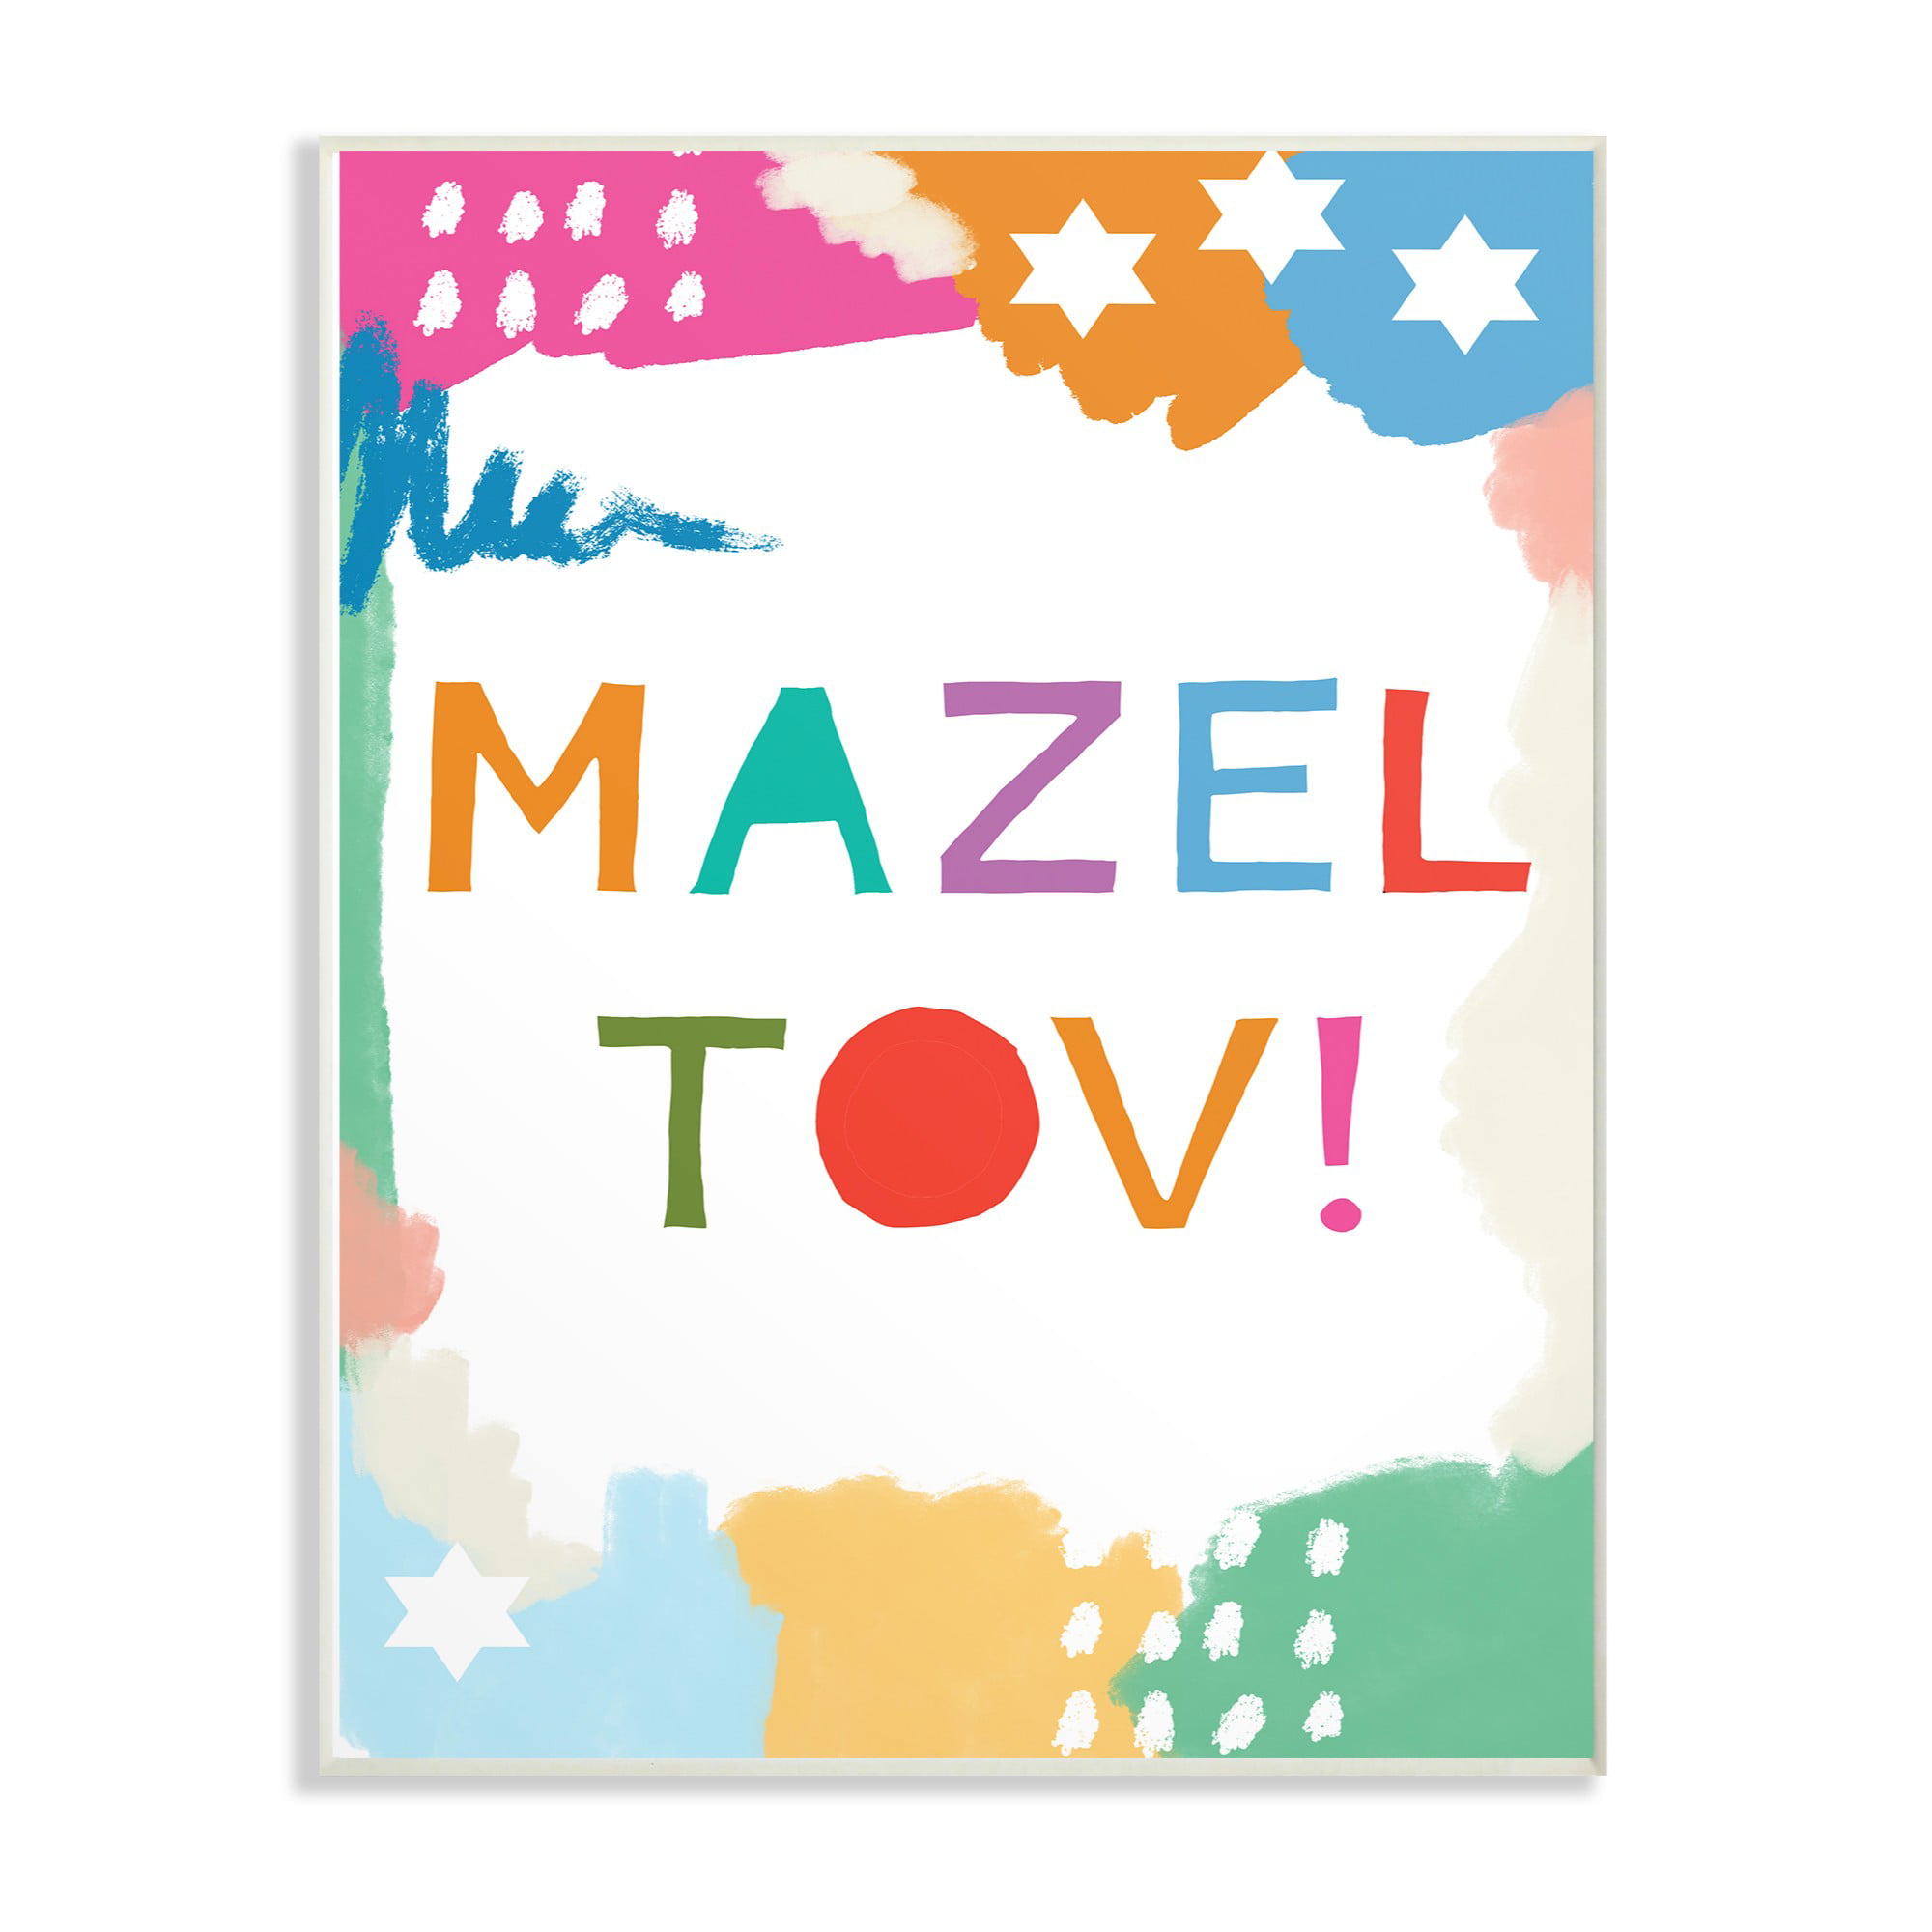 Multicolor The Stupell Home Decor CollectionMazel Tov Colorful Hebrew Wall Plaque Art 13 x 19 